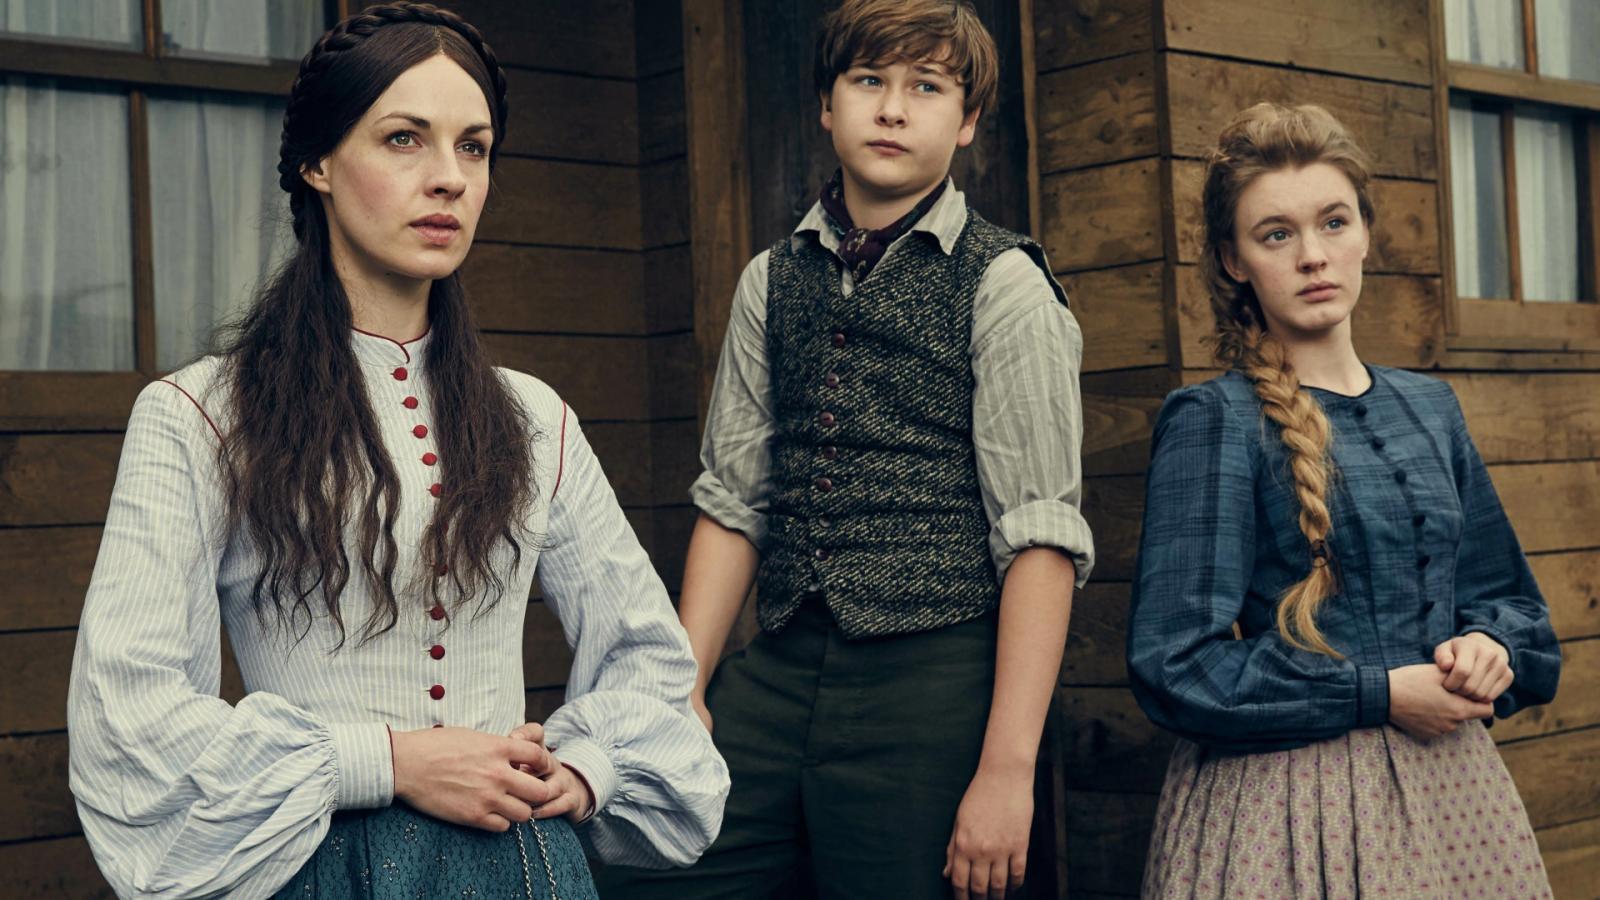 10 Light-Hearted Period Dramas to Watch Instead of Outlander - image 7